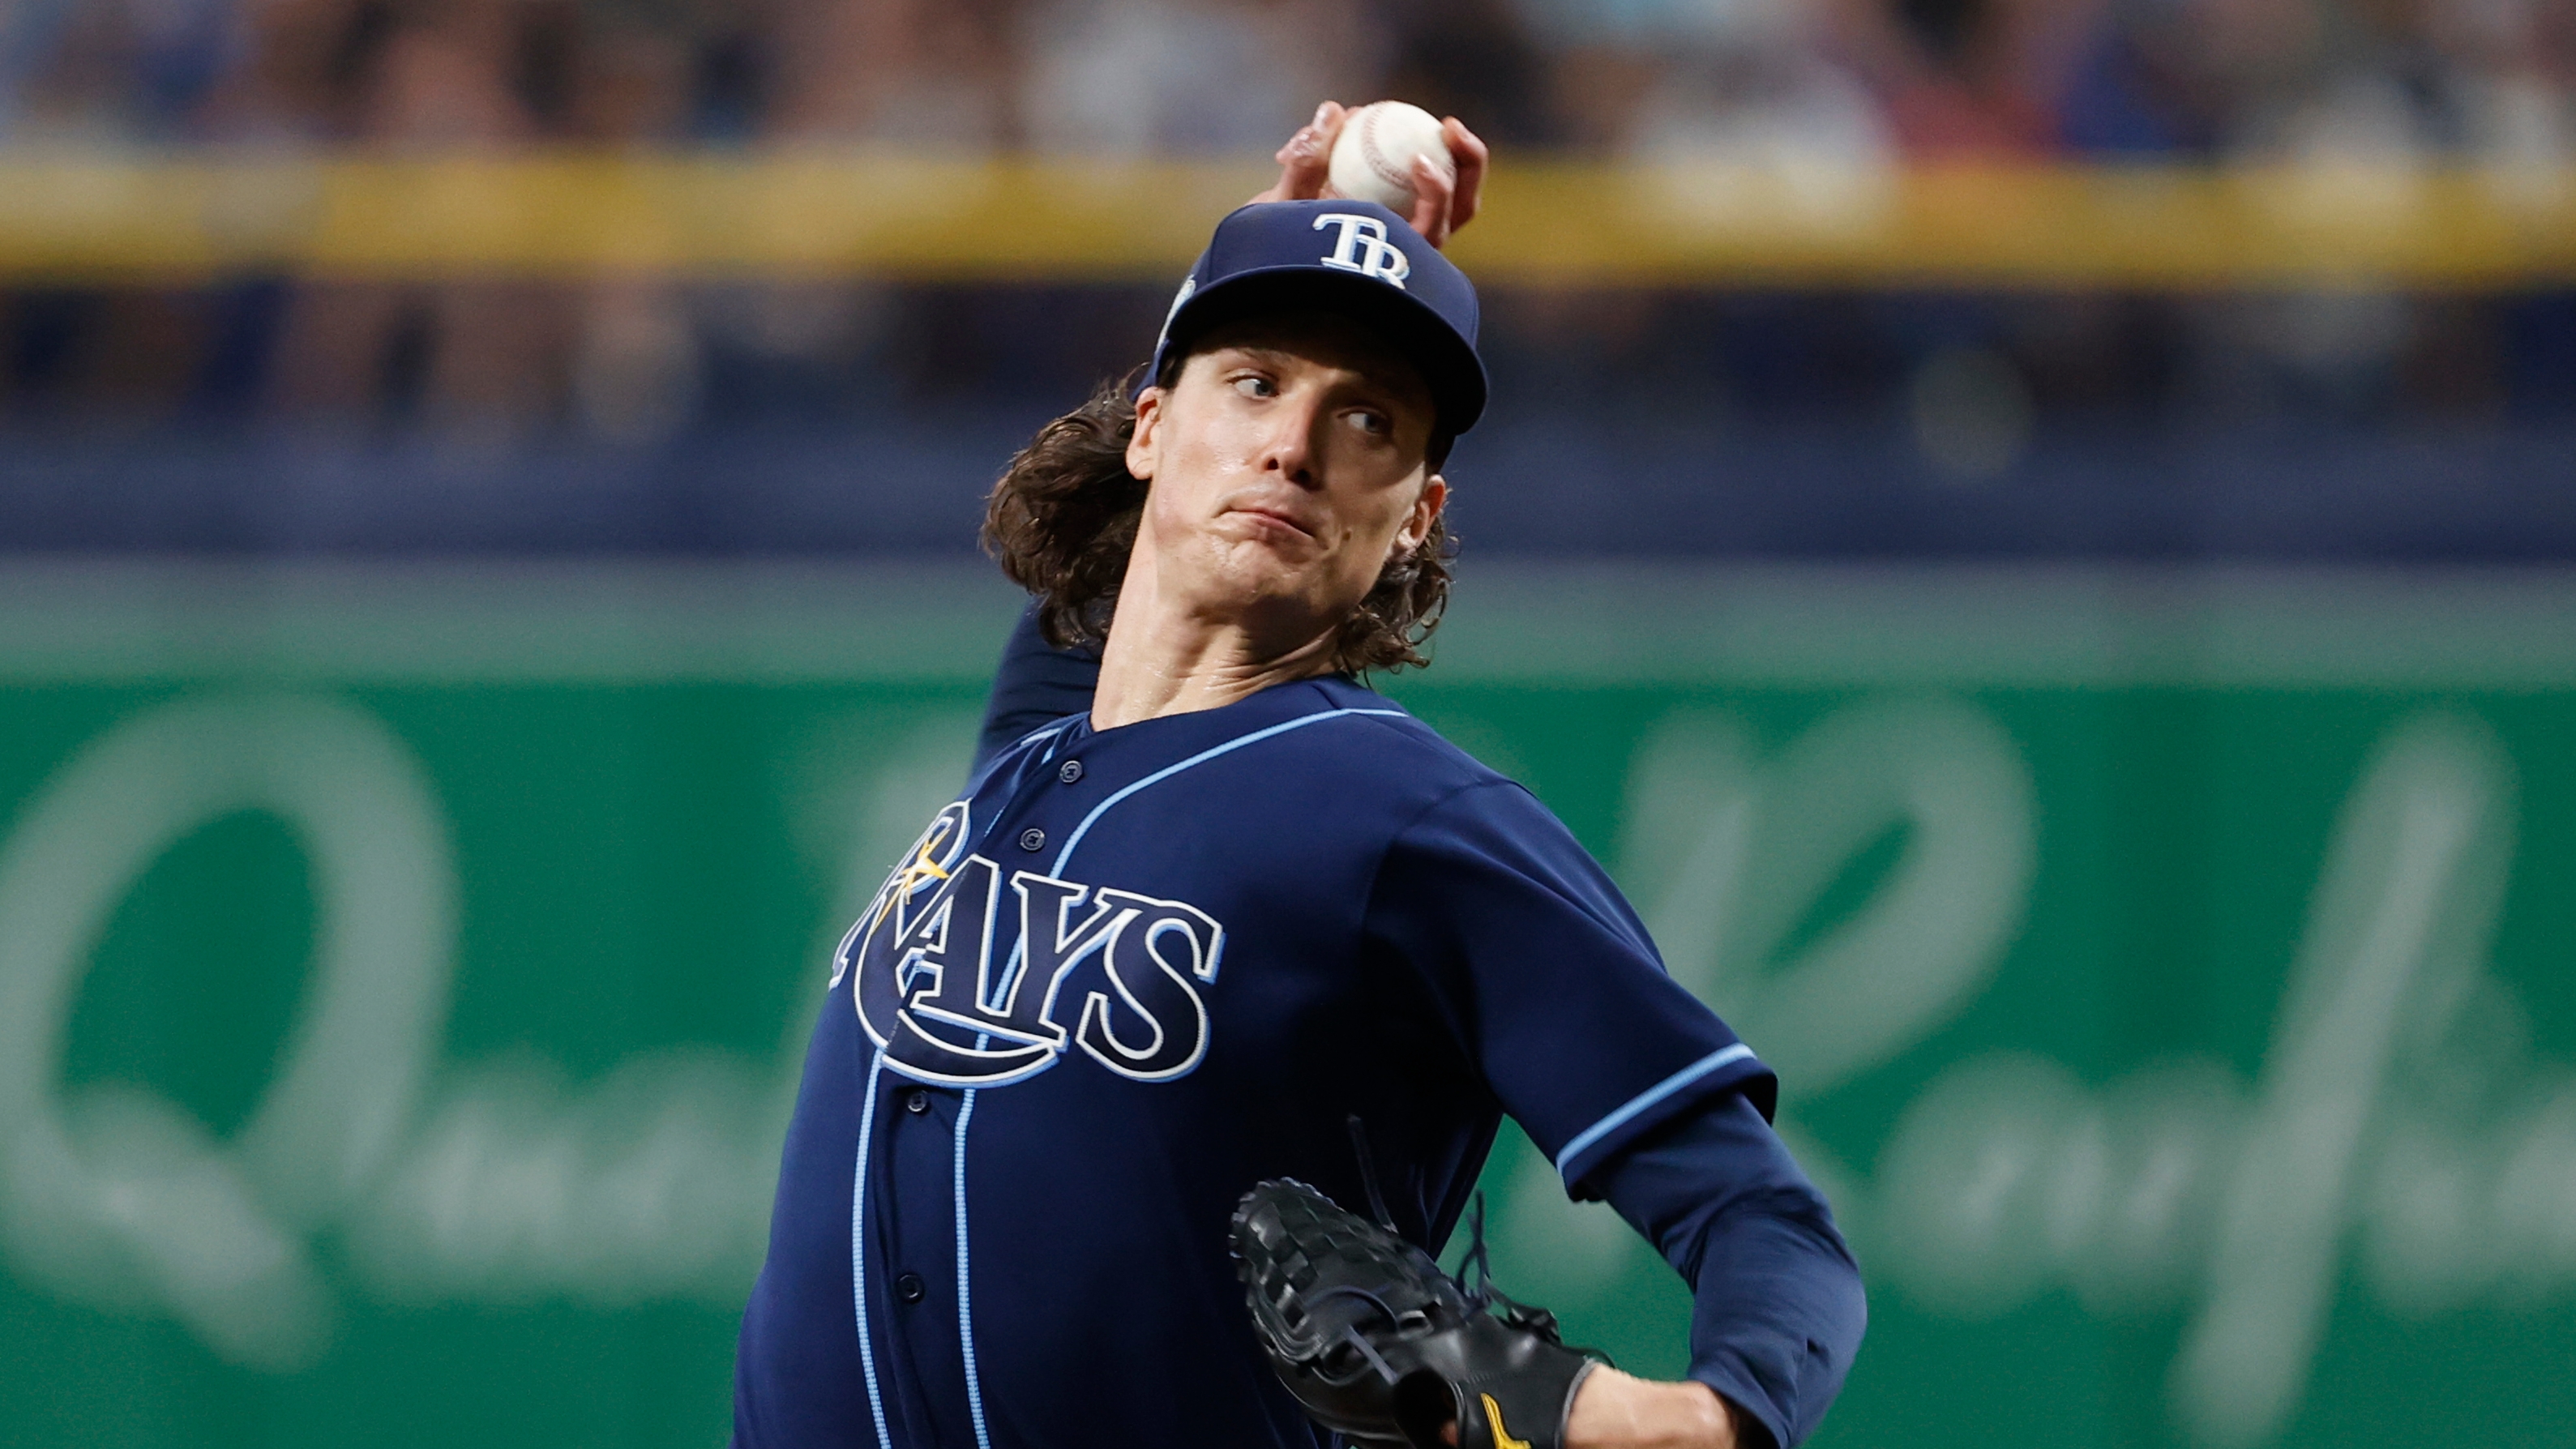 Glasnow's Strong Start Continues, Rays Beat Orioles 4-2